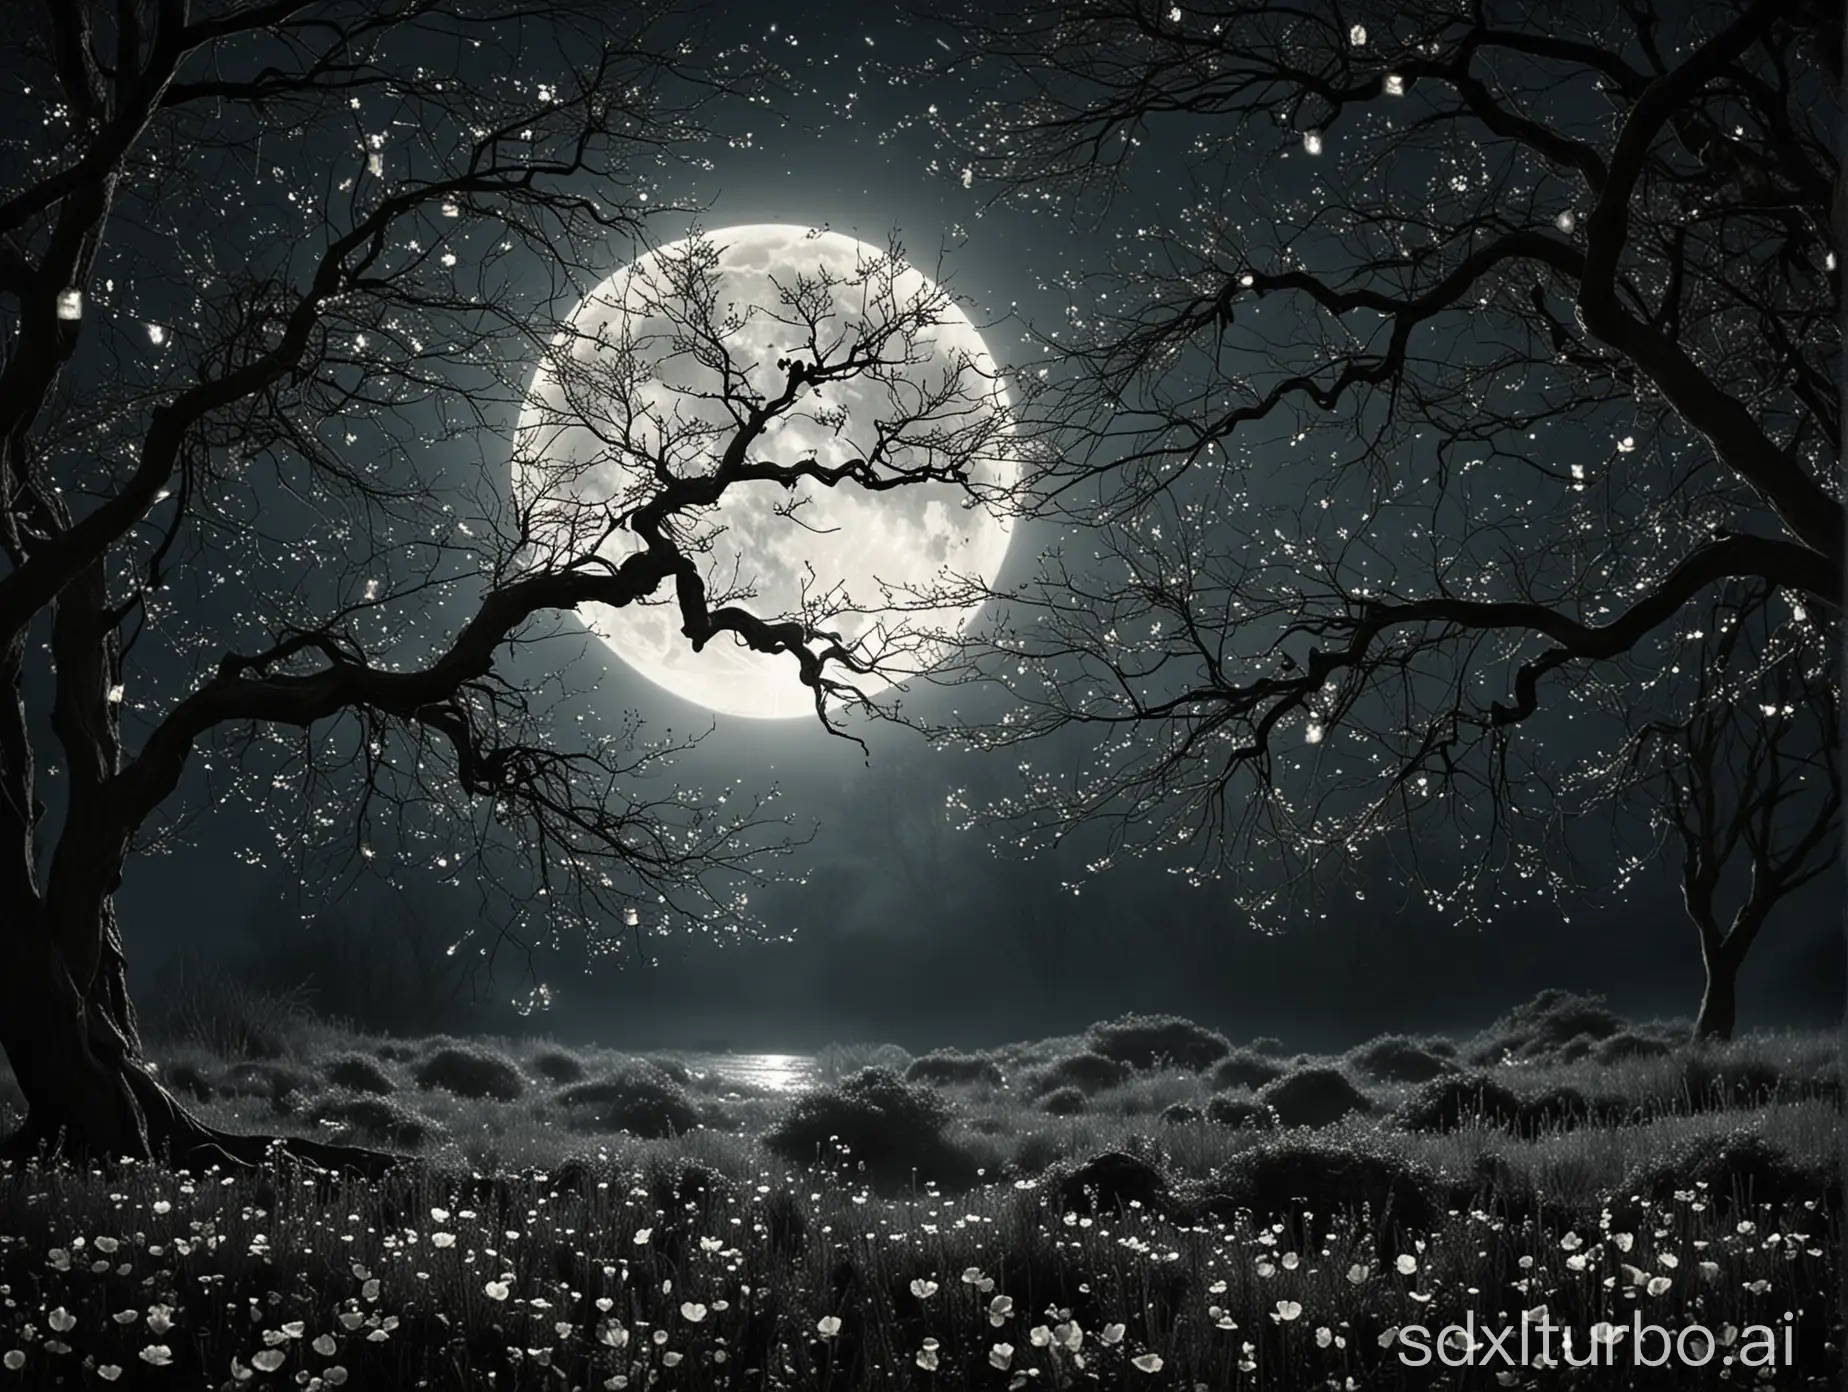 The night whispers softly under the caress of the full moon's pale luminance. A delicate veil of silver spills across slumbering fields and gently rolls over ancient tree branches reaching like lovers' arms to embrace the celestial light. The world lies in rapturous repose under this tender glow, at peace in the moon's nurturing embrace.nFrom the indigo heavens, the moon's golden eye smiles beneficently upon the dreaming earth below. Her radiant face, aglow with the delicate blush of an eternal maiden, lends each object its own gentle aura - trees become lamps lit from within, streams liquid ribbons of liquid pearl and diamonds.nIn those quiet hours before dawn's awakening, the world seems acquainted with magic and whispered secrets. Shadows soften into velvet cloaks perfumed with the scents of night-blooming jasmine and moonflowers uncurling in the lunar caress. Even the night breezes hold the promise of unseen mysteries as they rustle through silvered leaves in lingering susurrations.nIn this enchanted realm, the soul floats free - unfurled from weights of mortal trifles and ambitions. Transcendent tranquility reigns in the infinite depth of that moonlit ocean lapping against life's edges with divine rhythm. If one falls silent and surrenders fully to this ethereal tide's undertow, might we not finally emerge on the luminous shores of eternal truth?